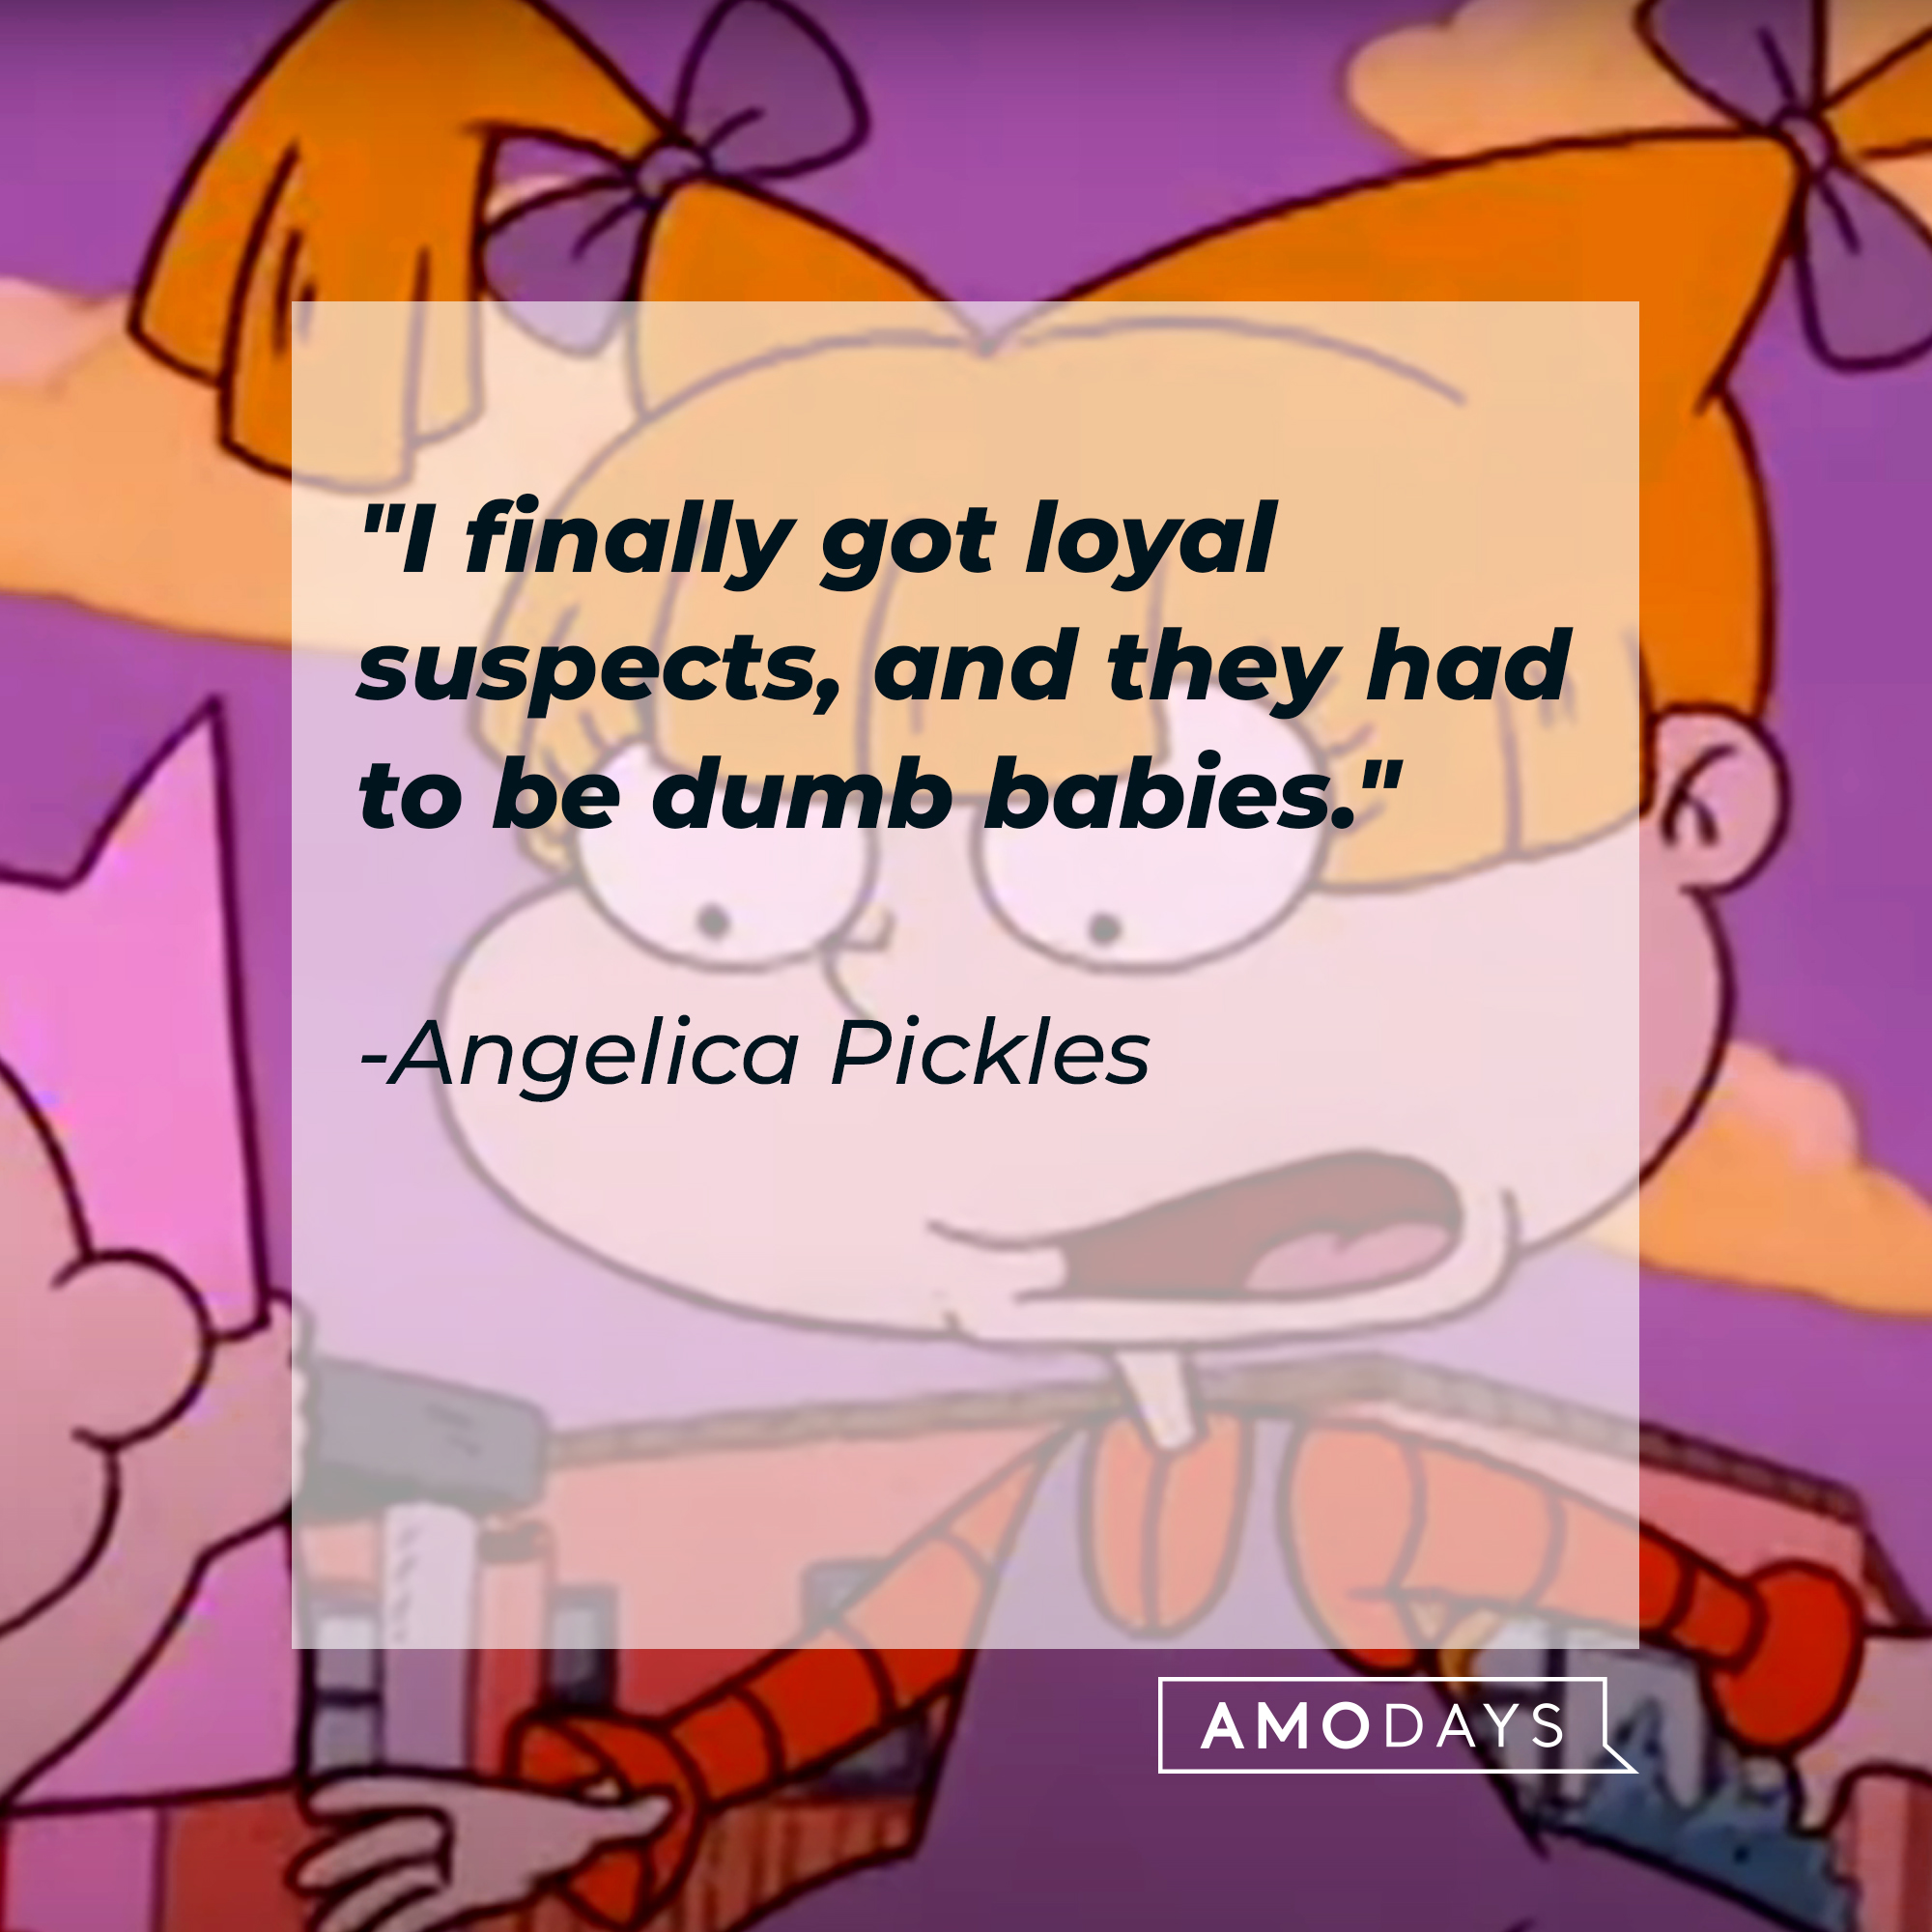 Angelica Pickles’ quote: "I finally got loyal suspects, and they had to be dumb babies." | Source: Facebook/Rugrats